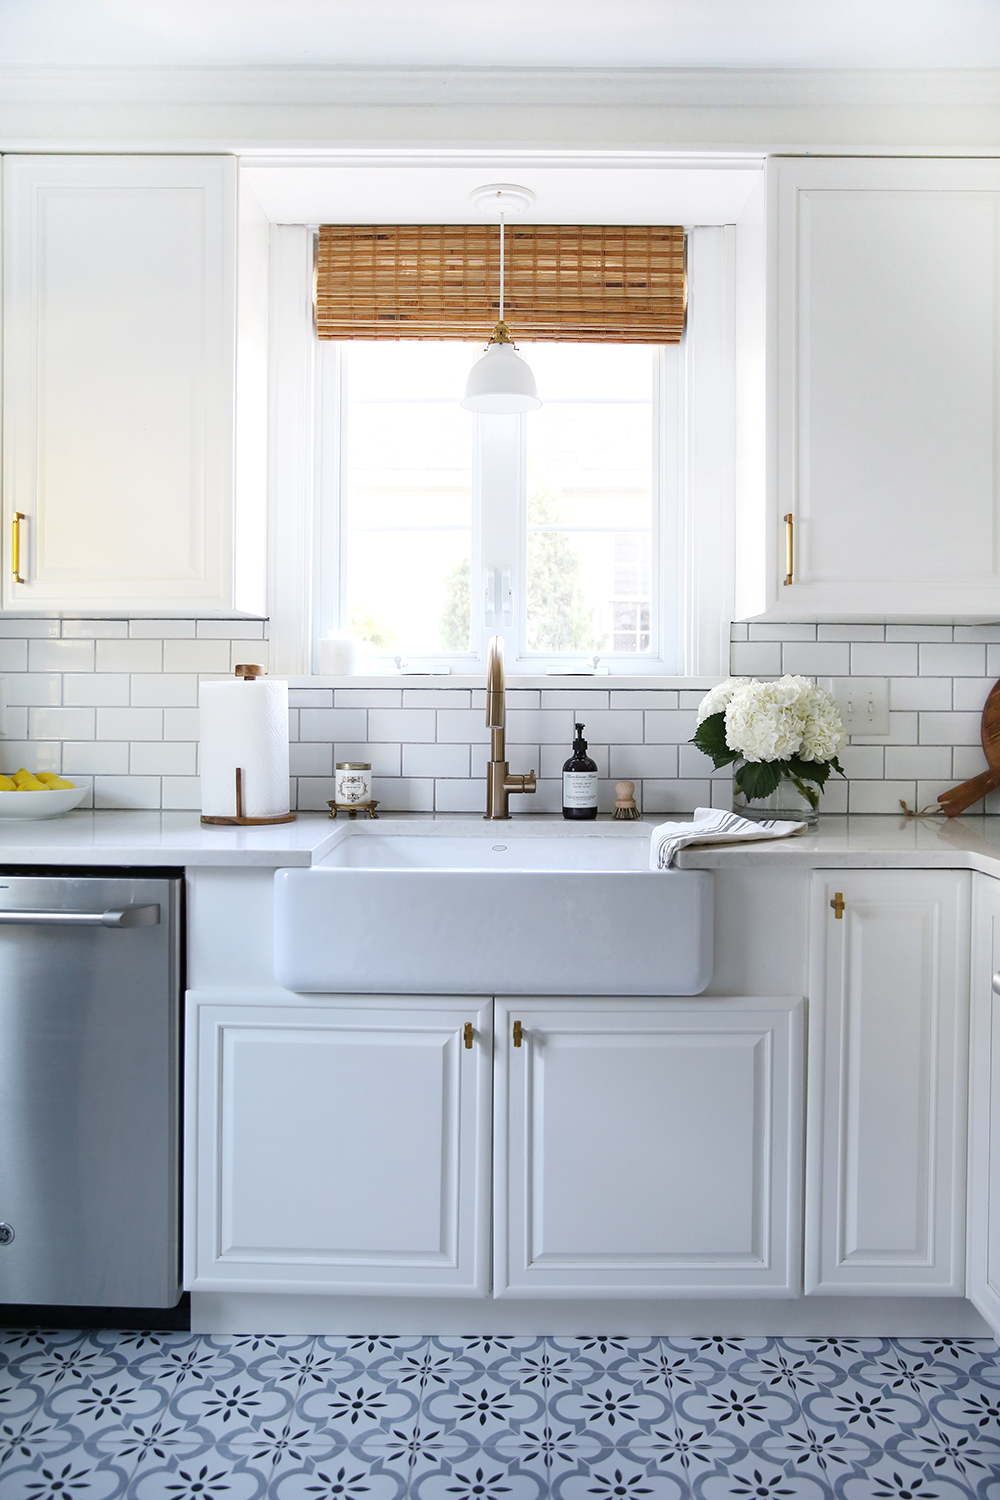 https://roomfortuesday.com/wp-content/uploads/2018/10/White-Kitchen-With-Blue-Patterned-Floors.jpg